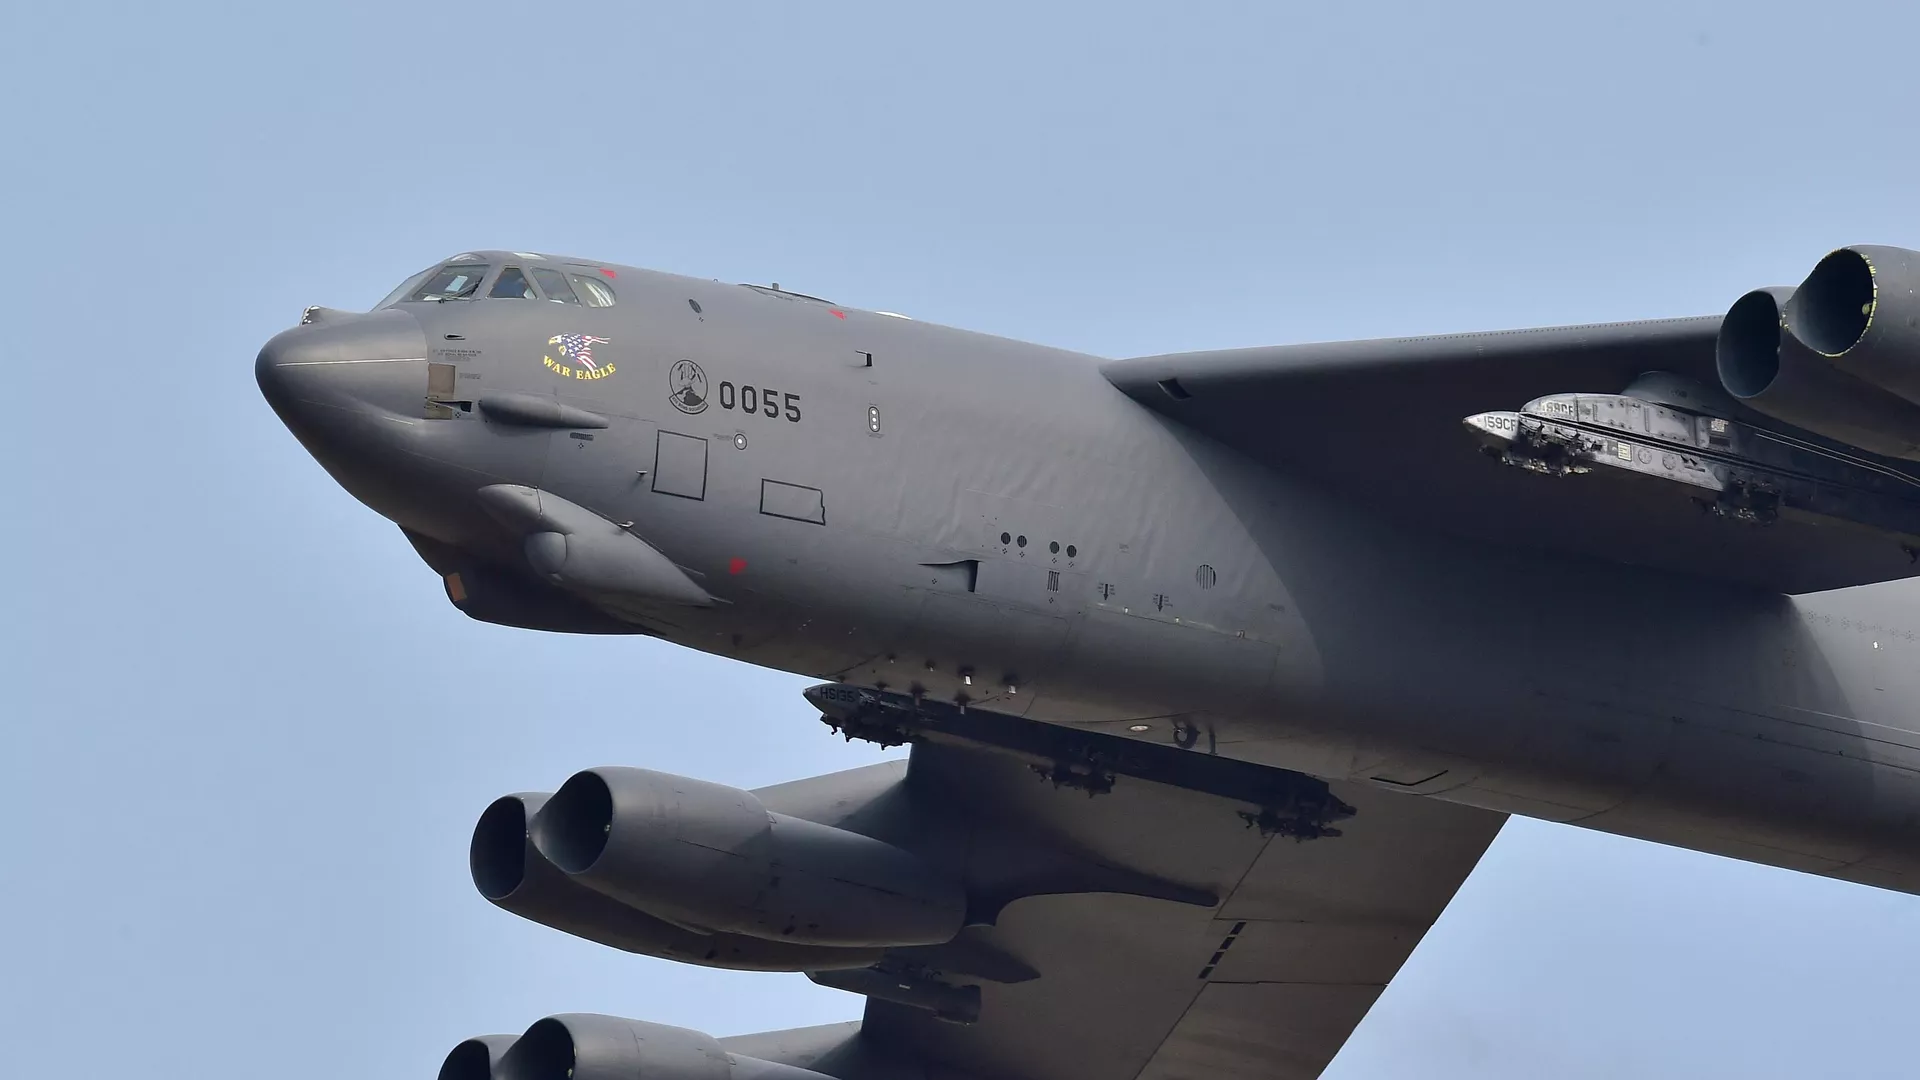 US B-52 Bomber Conducts Emergency Landing Due to Single-Engine Fire – Air Force